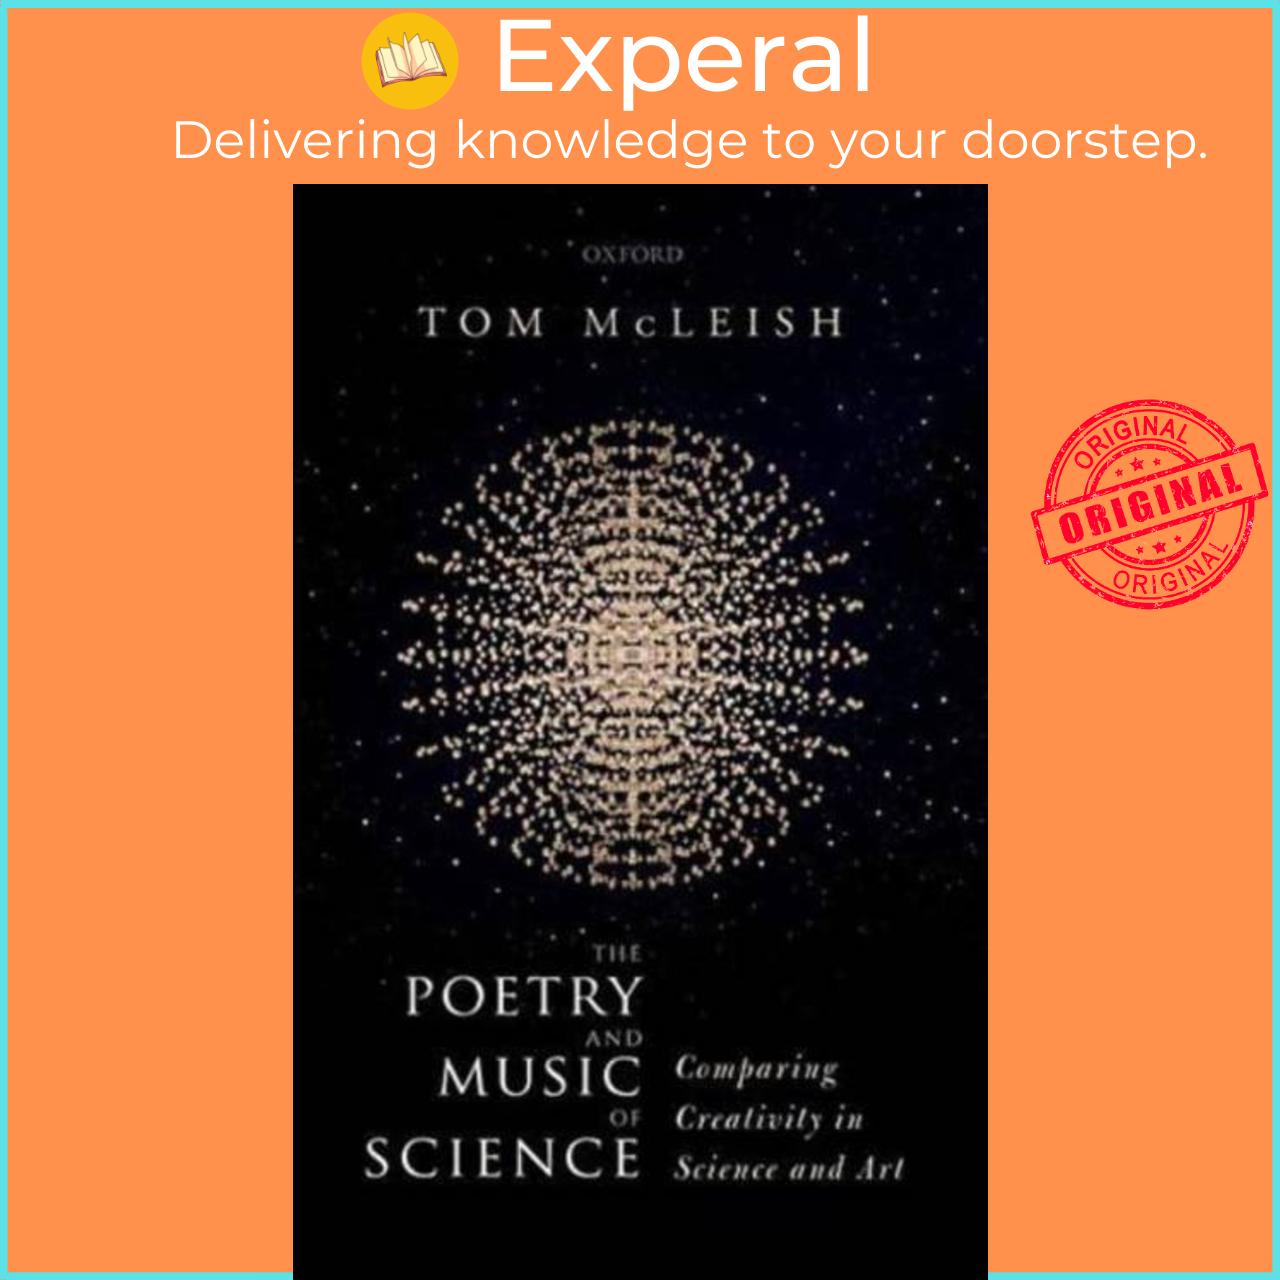 Sách - The Poetry and Music of Science - Comparing Creativity in Science and Art by Tom McLeish (UK edition, paperback)